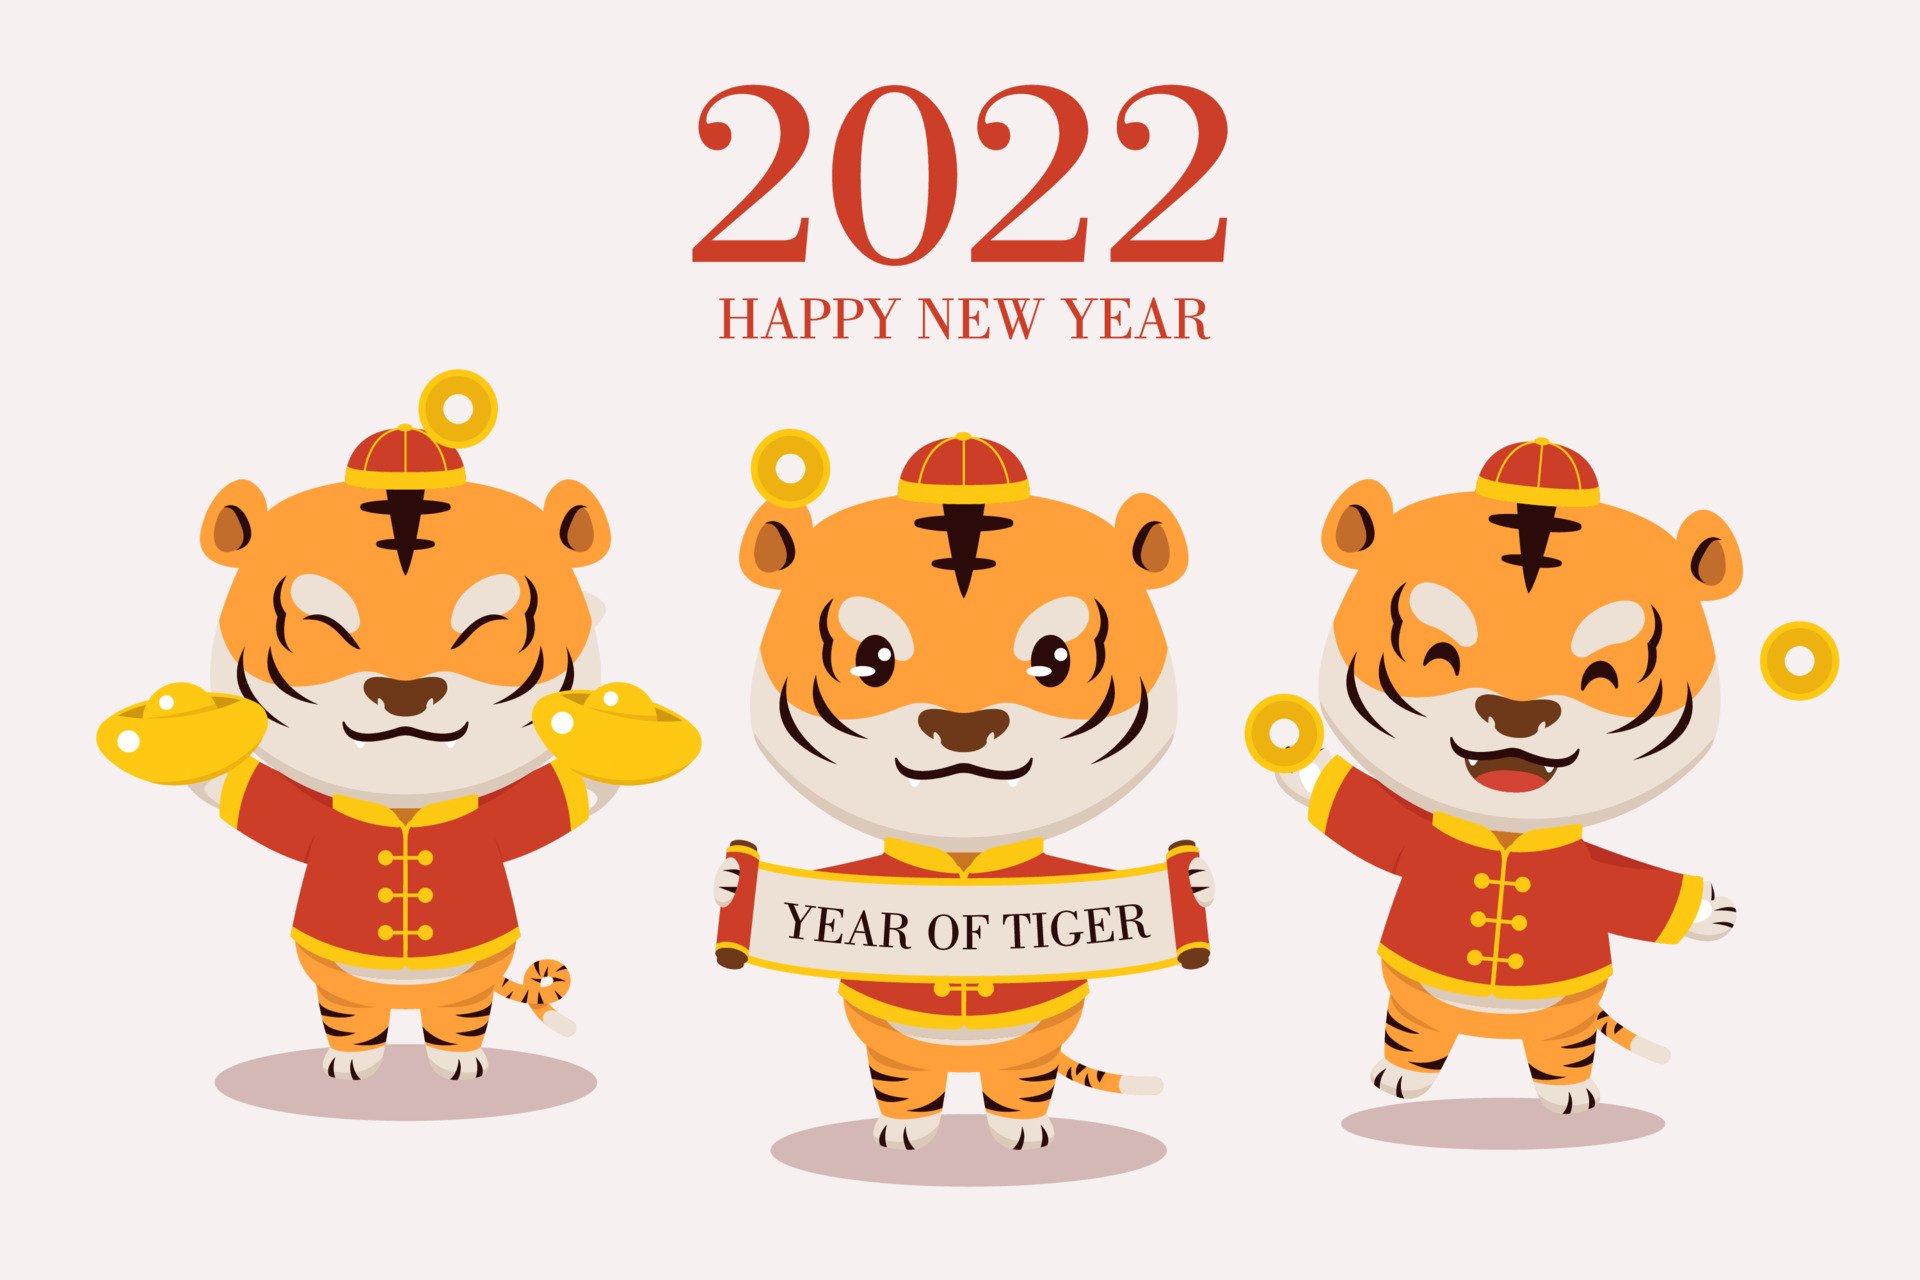 cute chinese new year wallpaper 2022